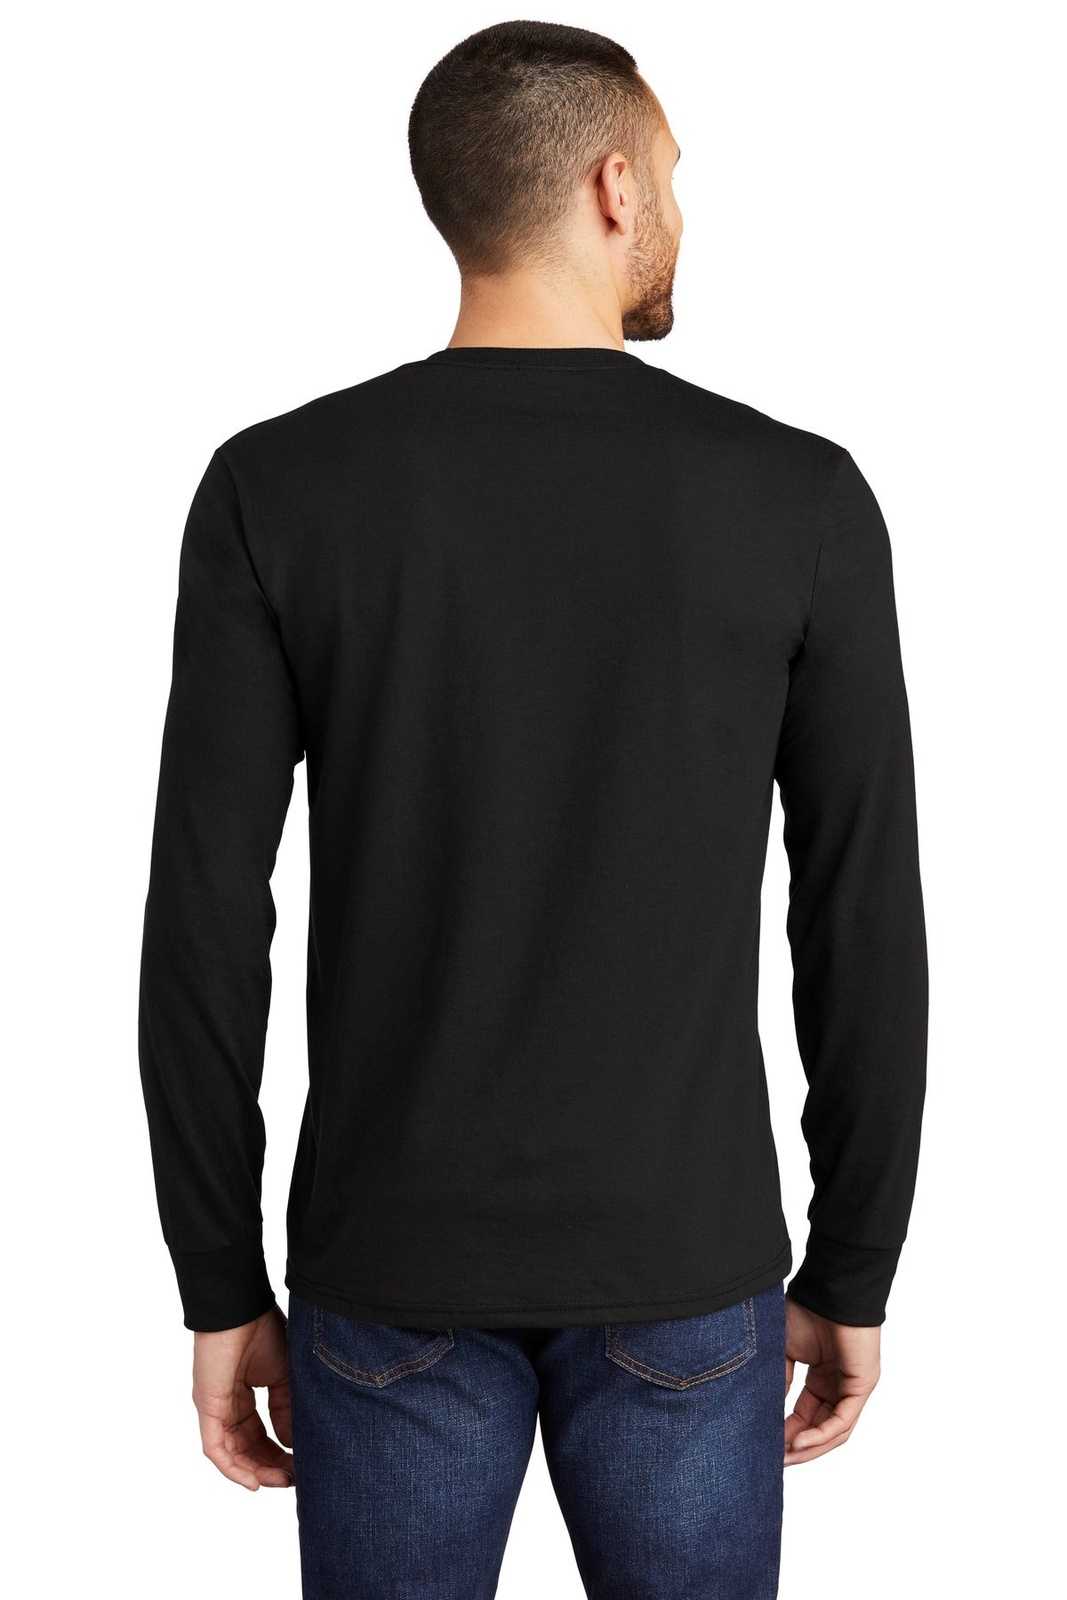 District DM132 Perfect Tri Long Sleeve Tee - Black - HIT a Double - 2